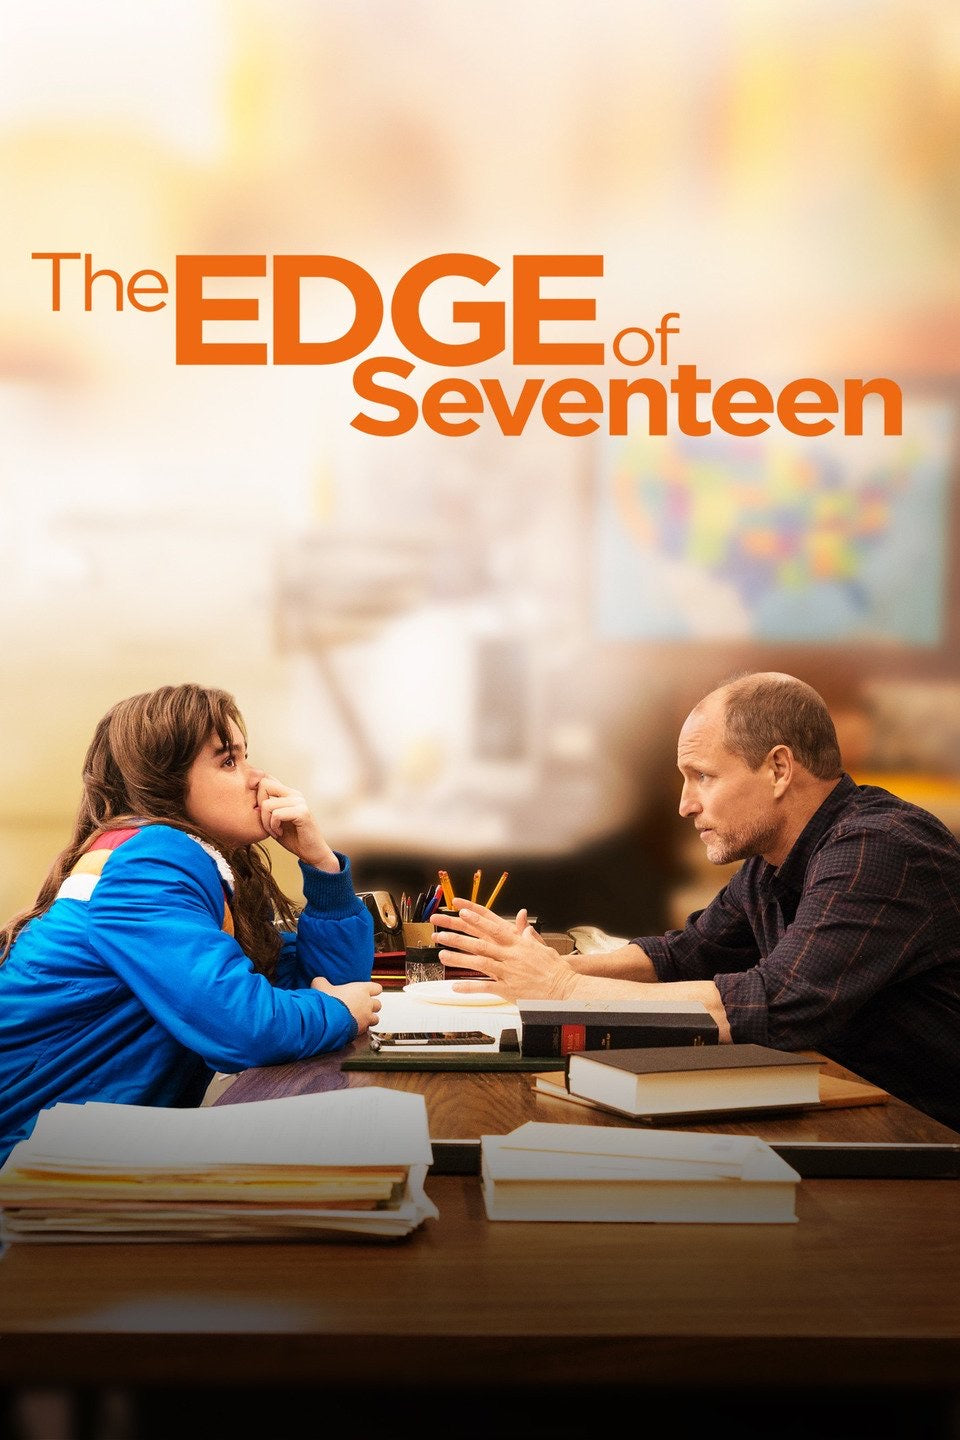 The Edge of Seventeen (2016) Vudu or Movies Anywhere HD redemption only